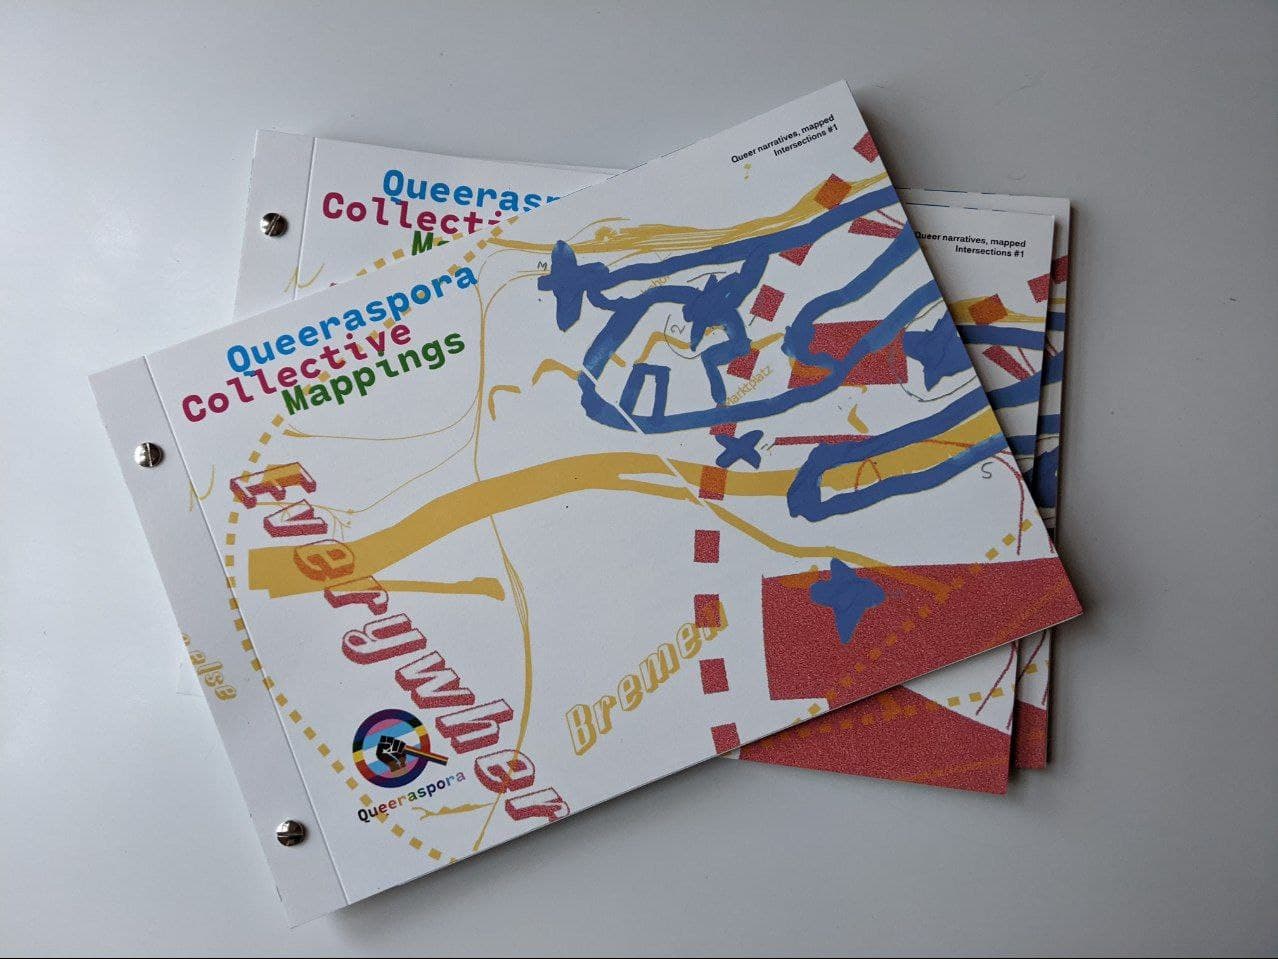 Three brochures, stacked with the title Queeraspora collective mappings